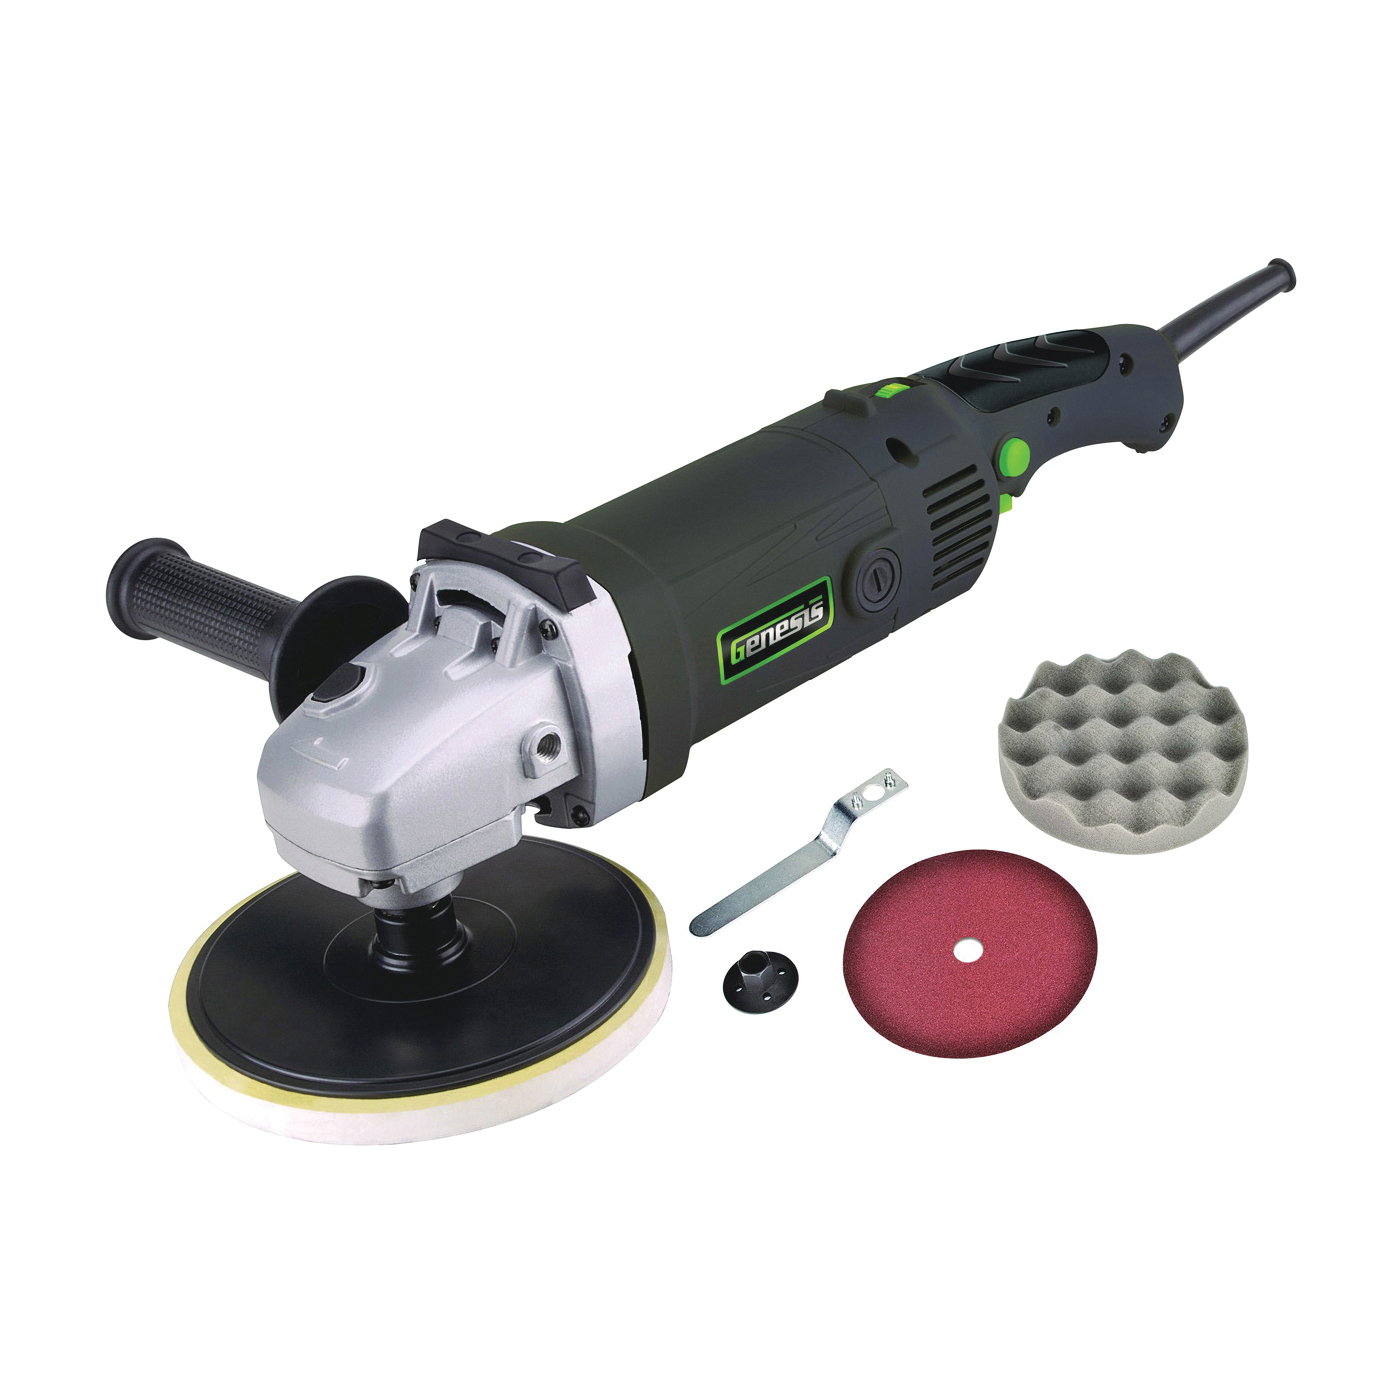 Genesis GSP1711 Variable Speed Sander/Polisher, 11 A, 5/8-11 UNC Spindle, 600 to 3000 rpm Speed, Auxiliary Handle - 1